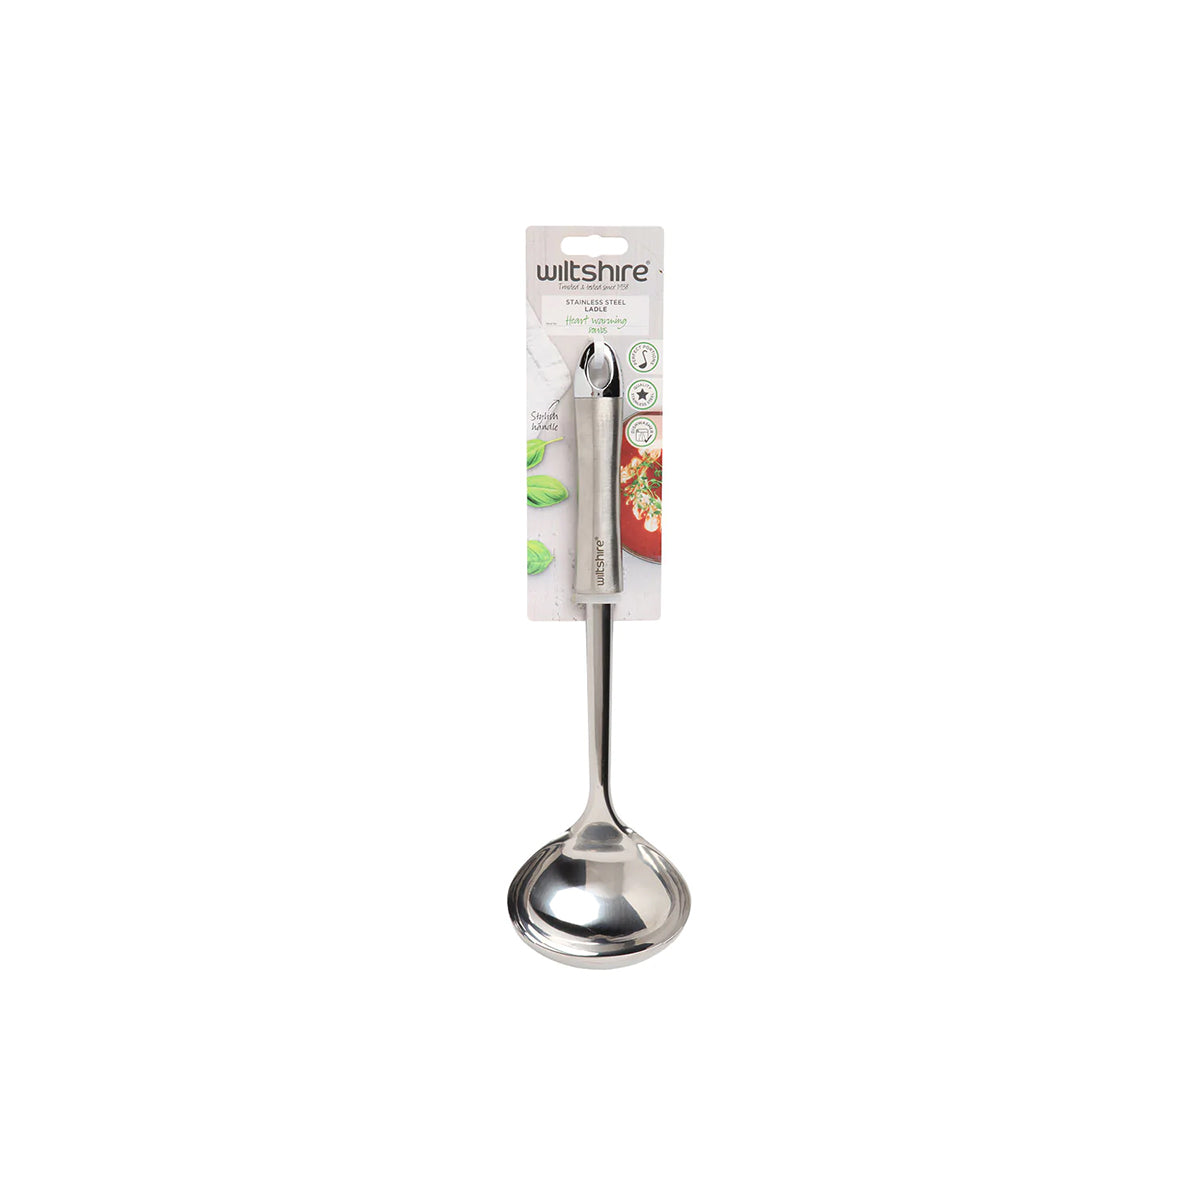 WLT43748 Wiltshire Industrial Soup Ladle Stainless Steel Tomkin Australia Hospitality Supplies